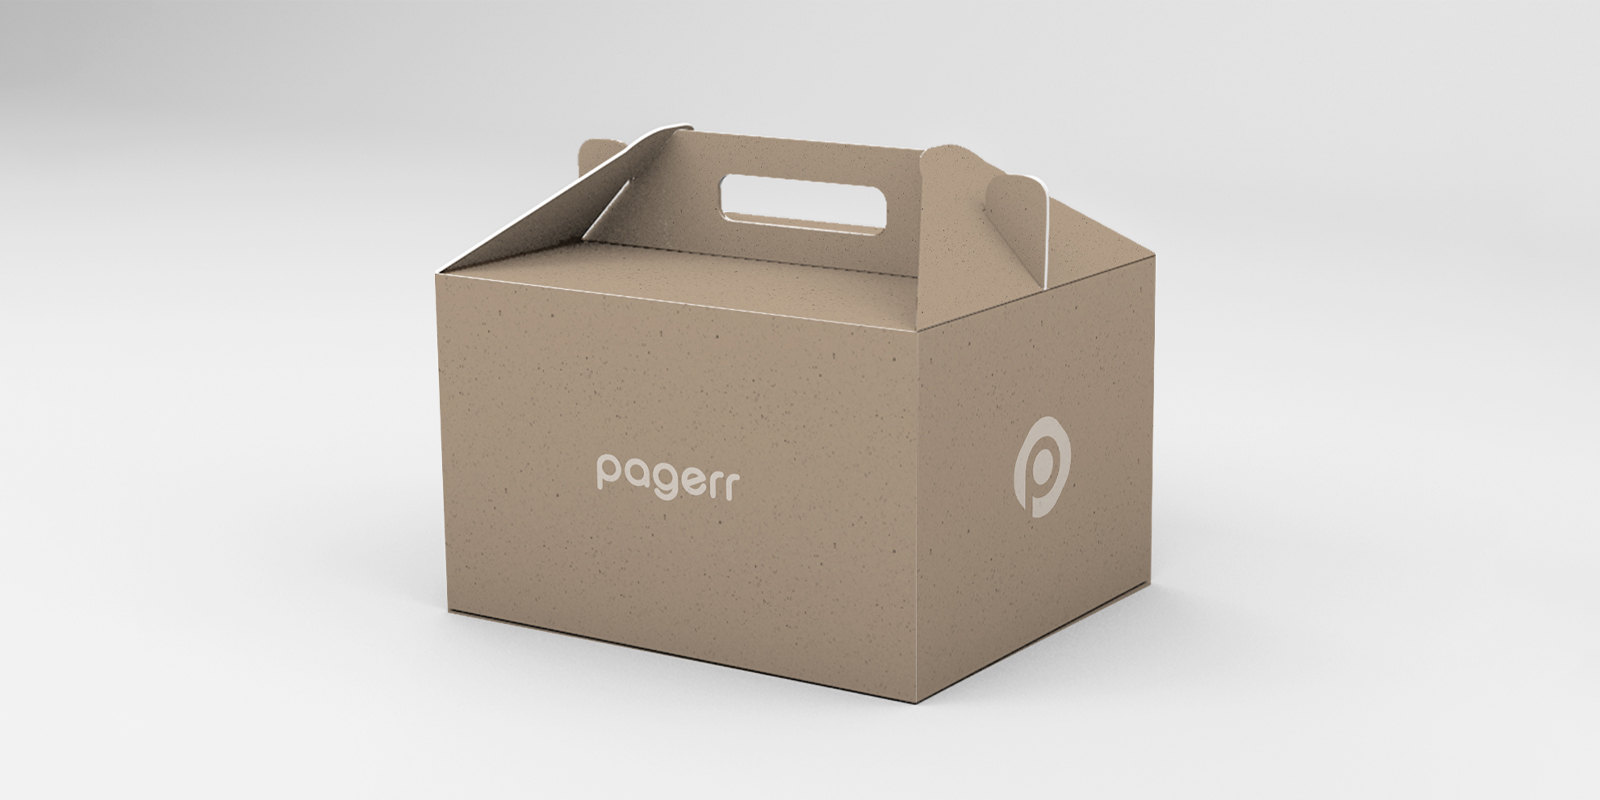 Takeaway boxes in Perth - Print with Pagerr